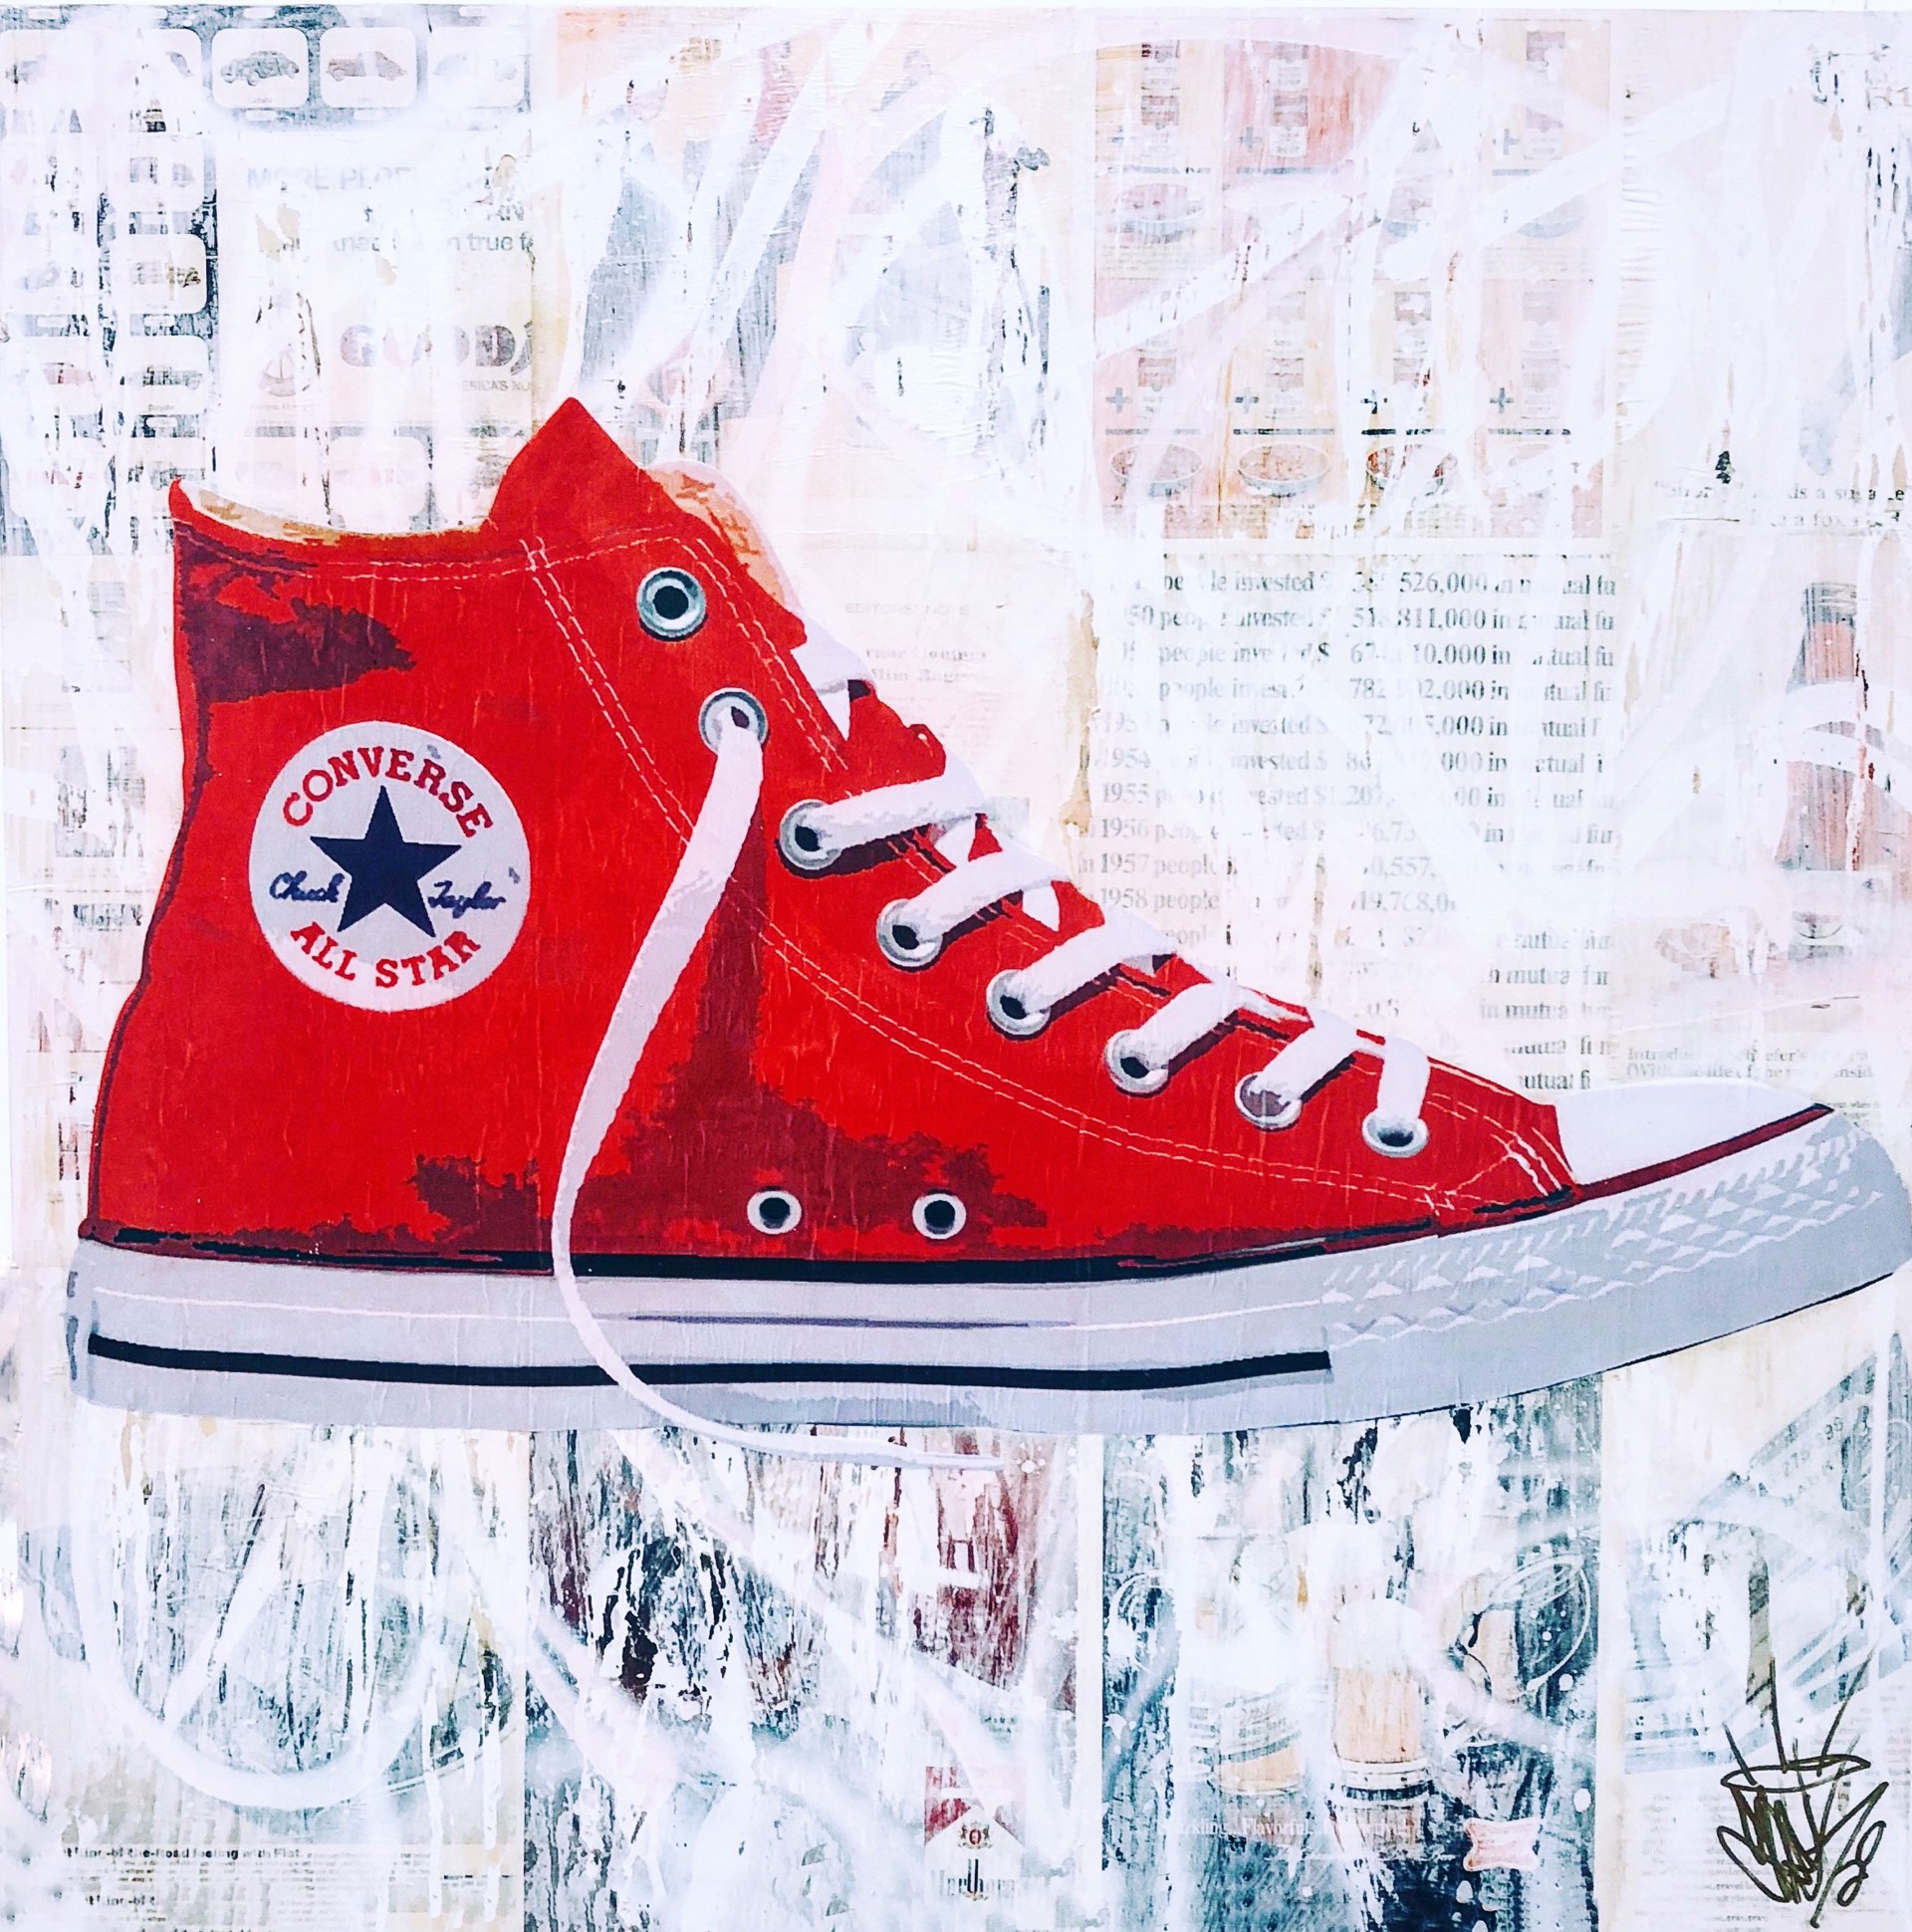 New Chucks - SOLD - commission available by Seek One